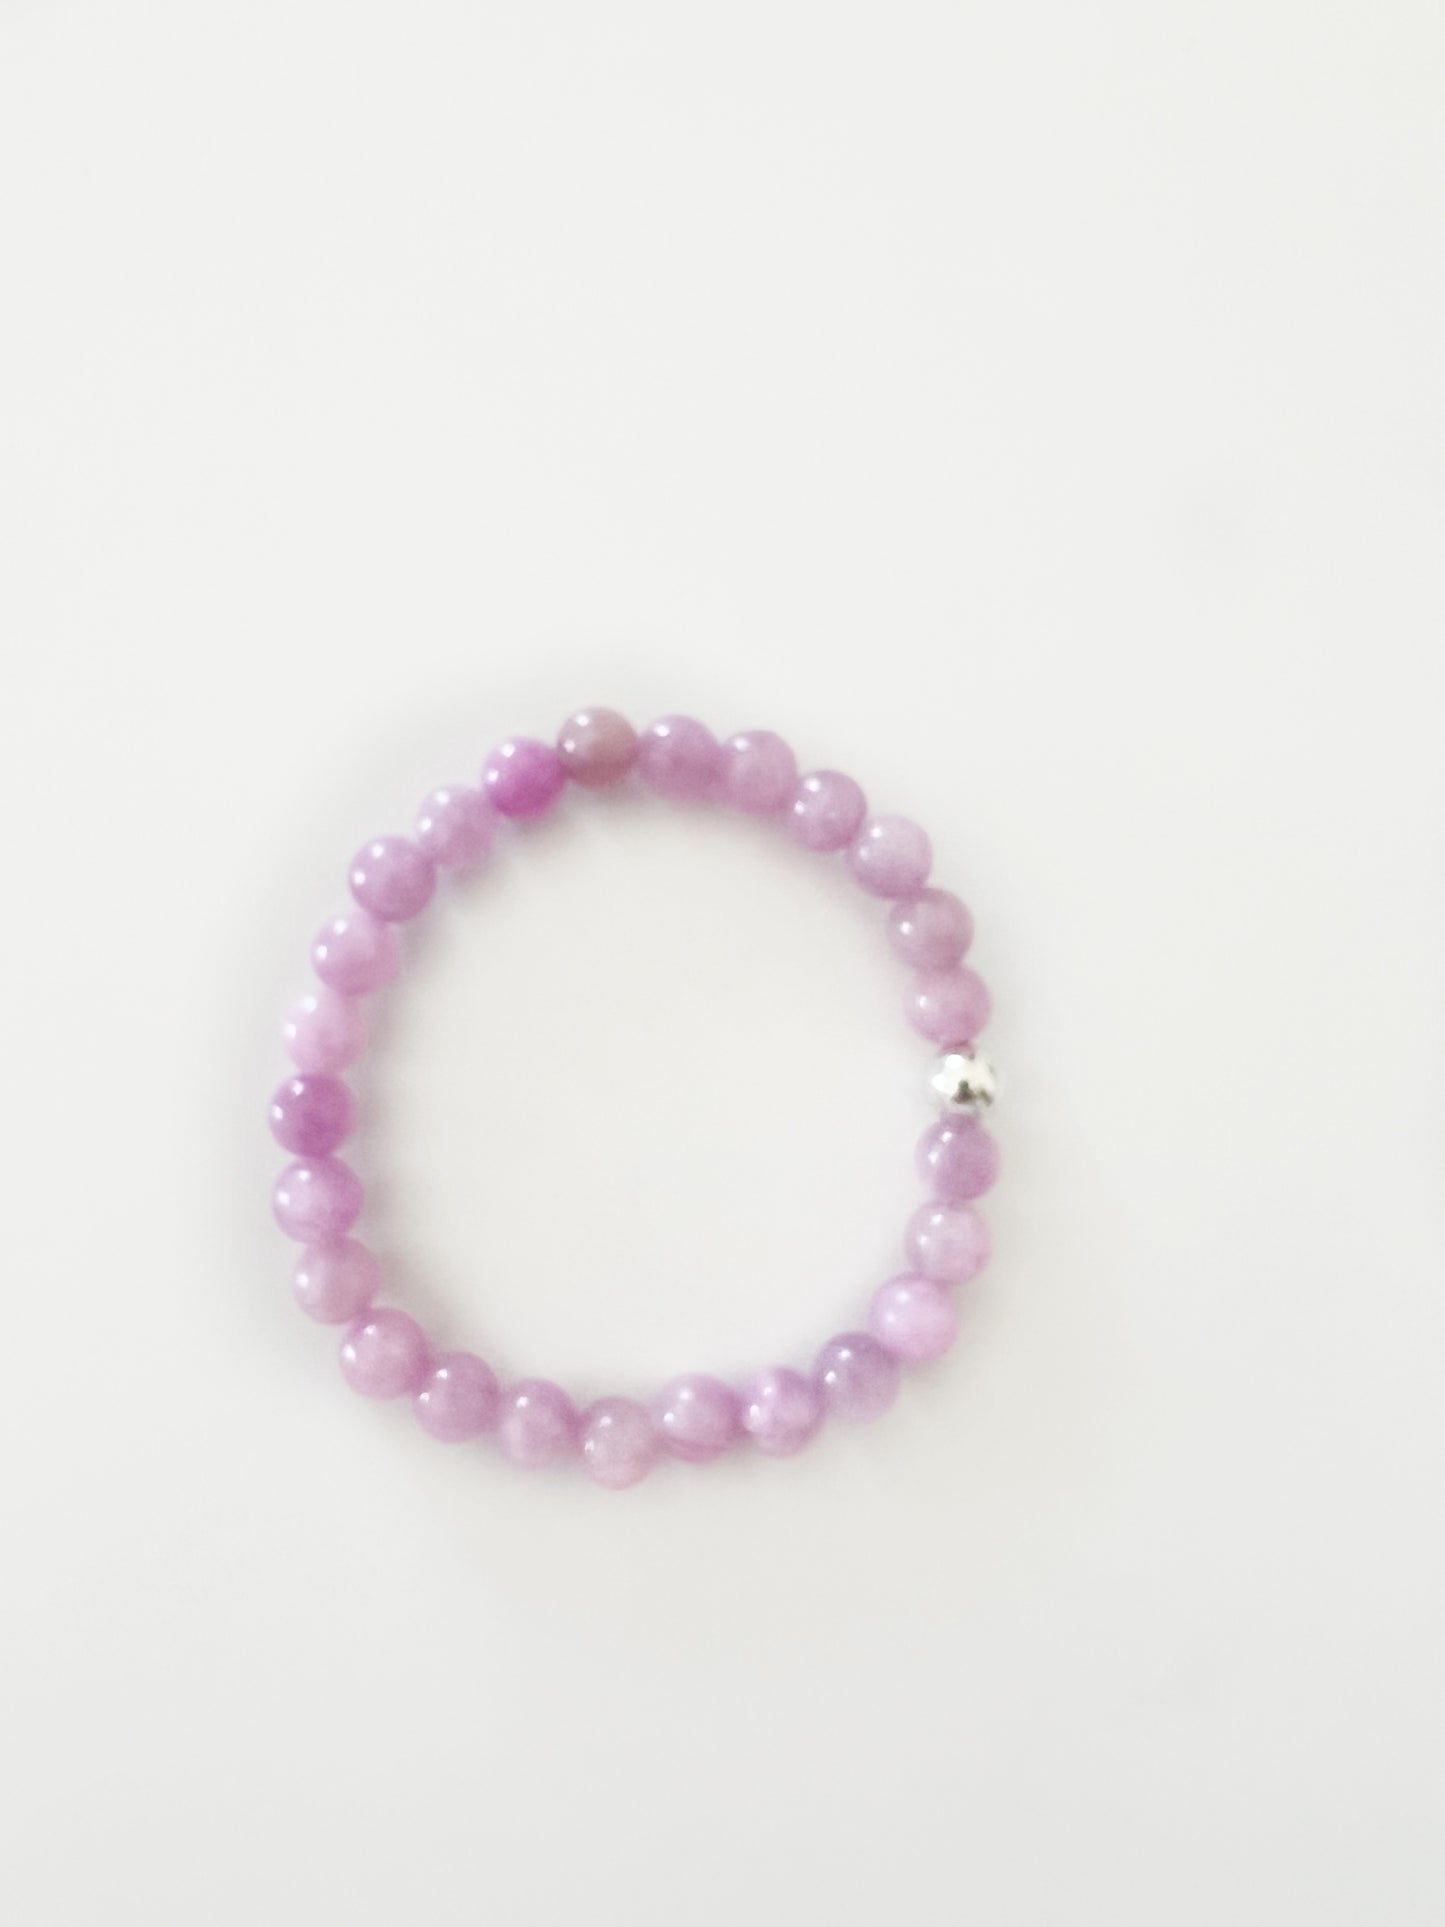 purple beaded stretch bracelet with one silver bead